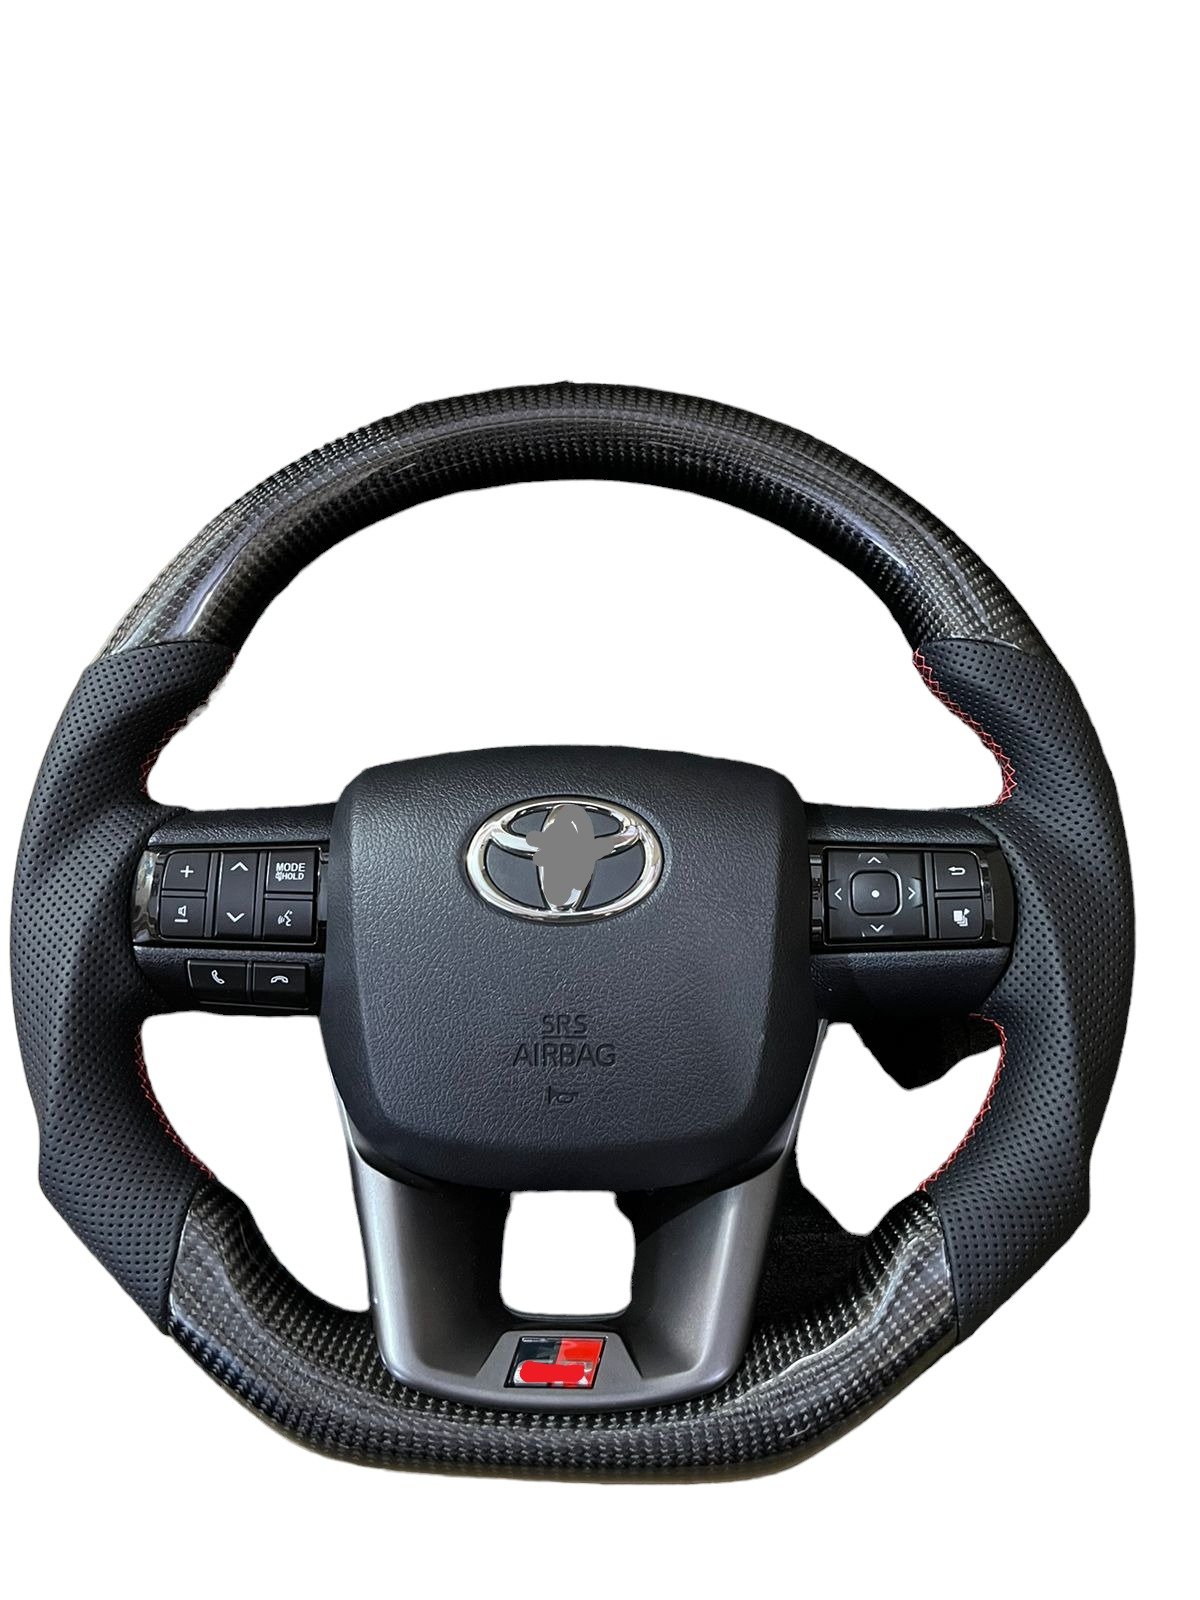 GR Sports Steering Wheel Compatible with Fortuner & Innova (Old & New Both) Image 